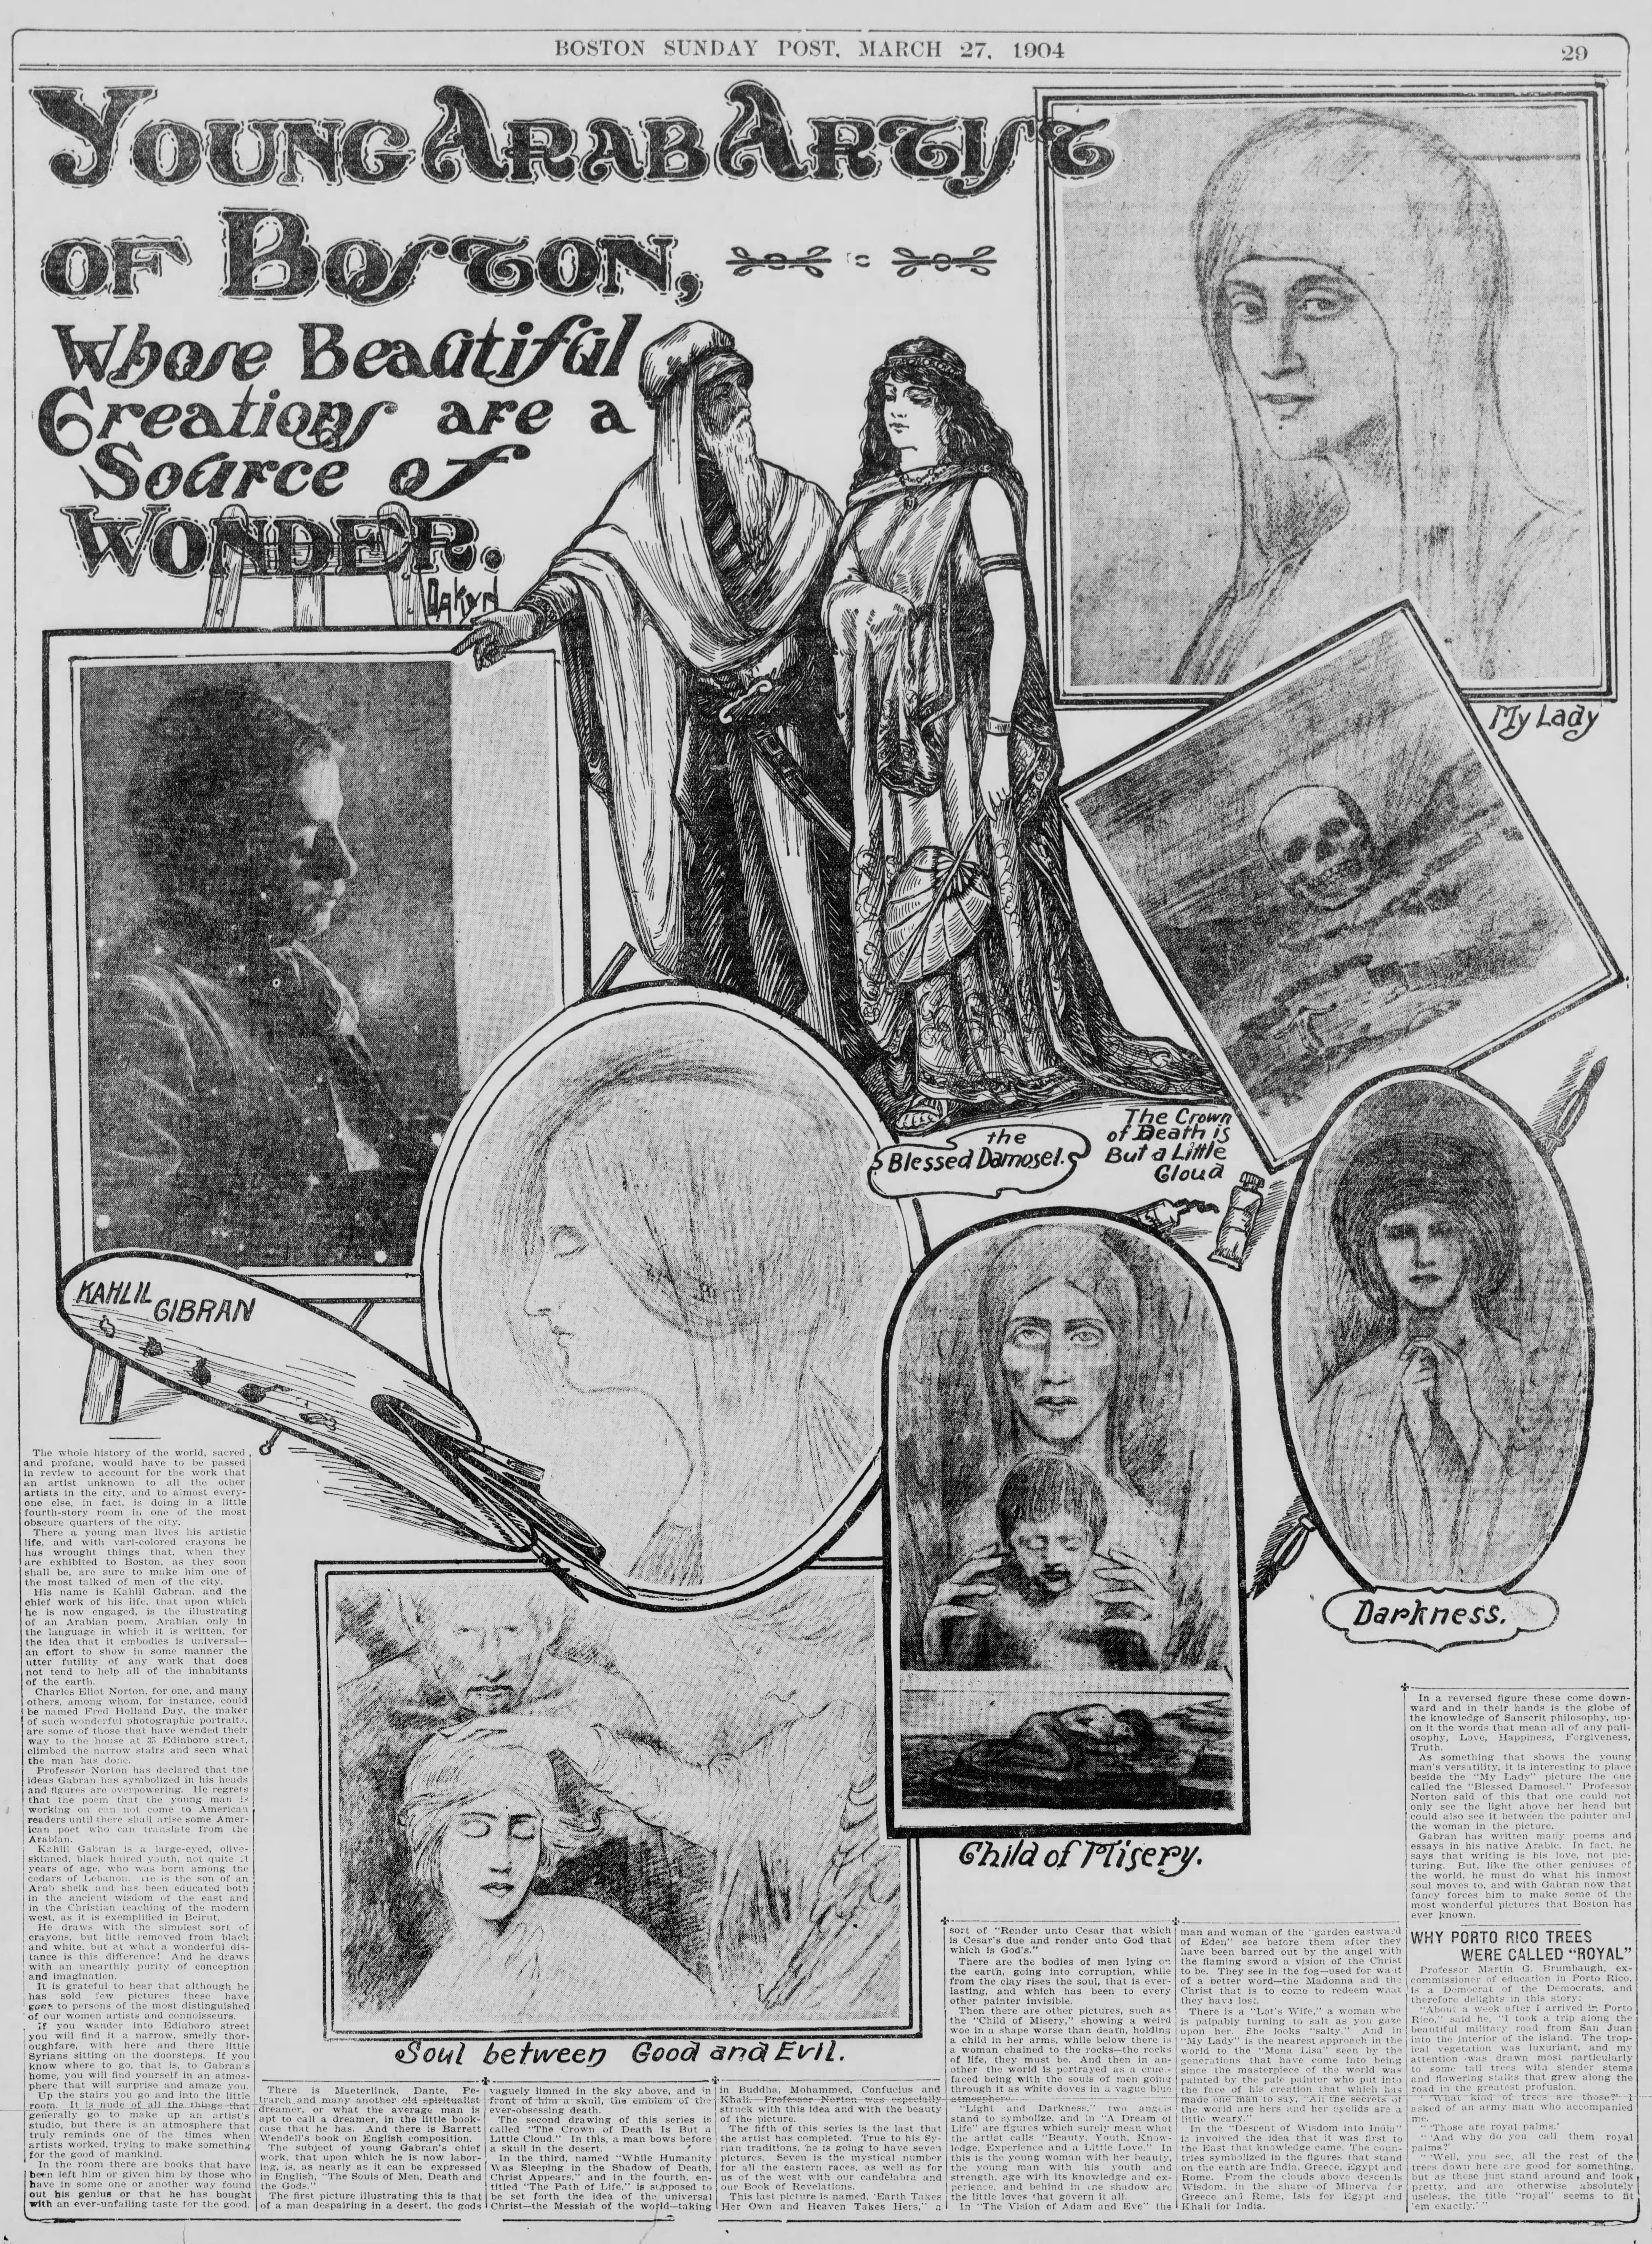 Young Arab Artist of Boston, Whose Beautiful Creations are a Source of Wonder, Boston Sunday Post, March 27, 1904